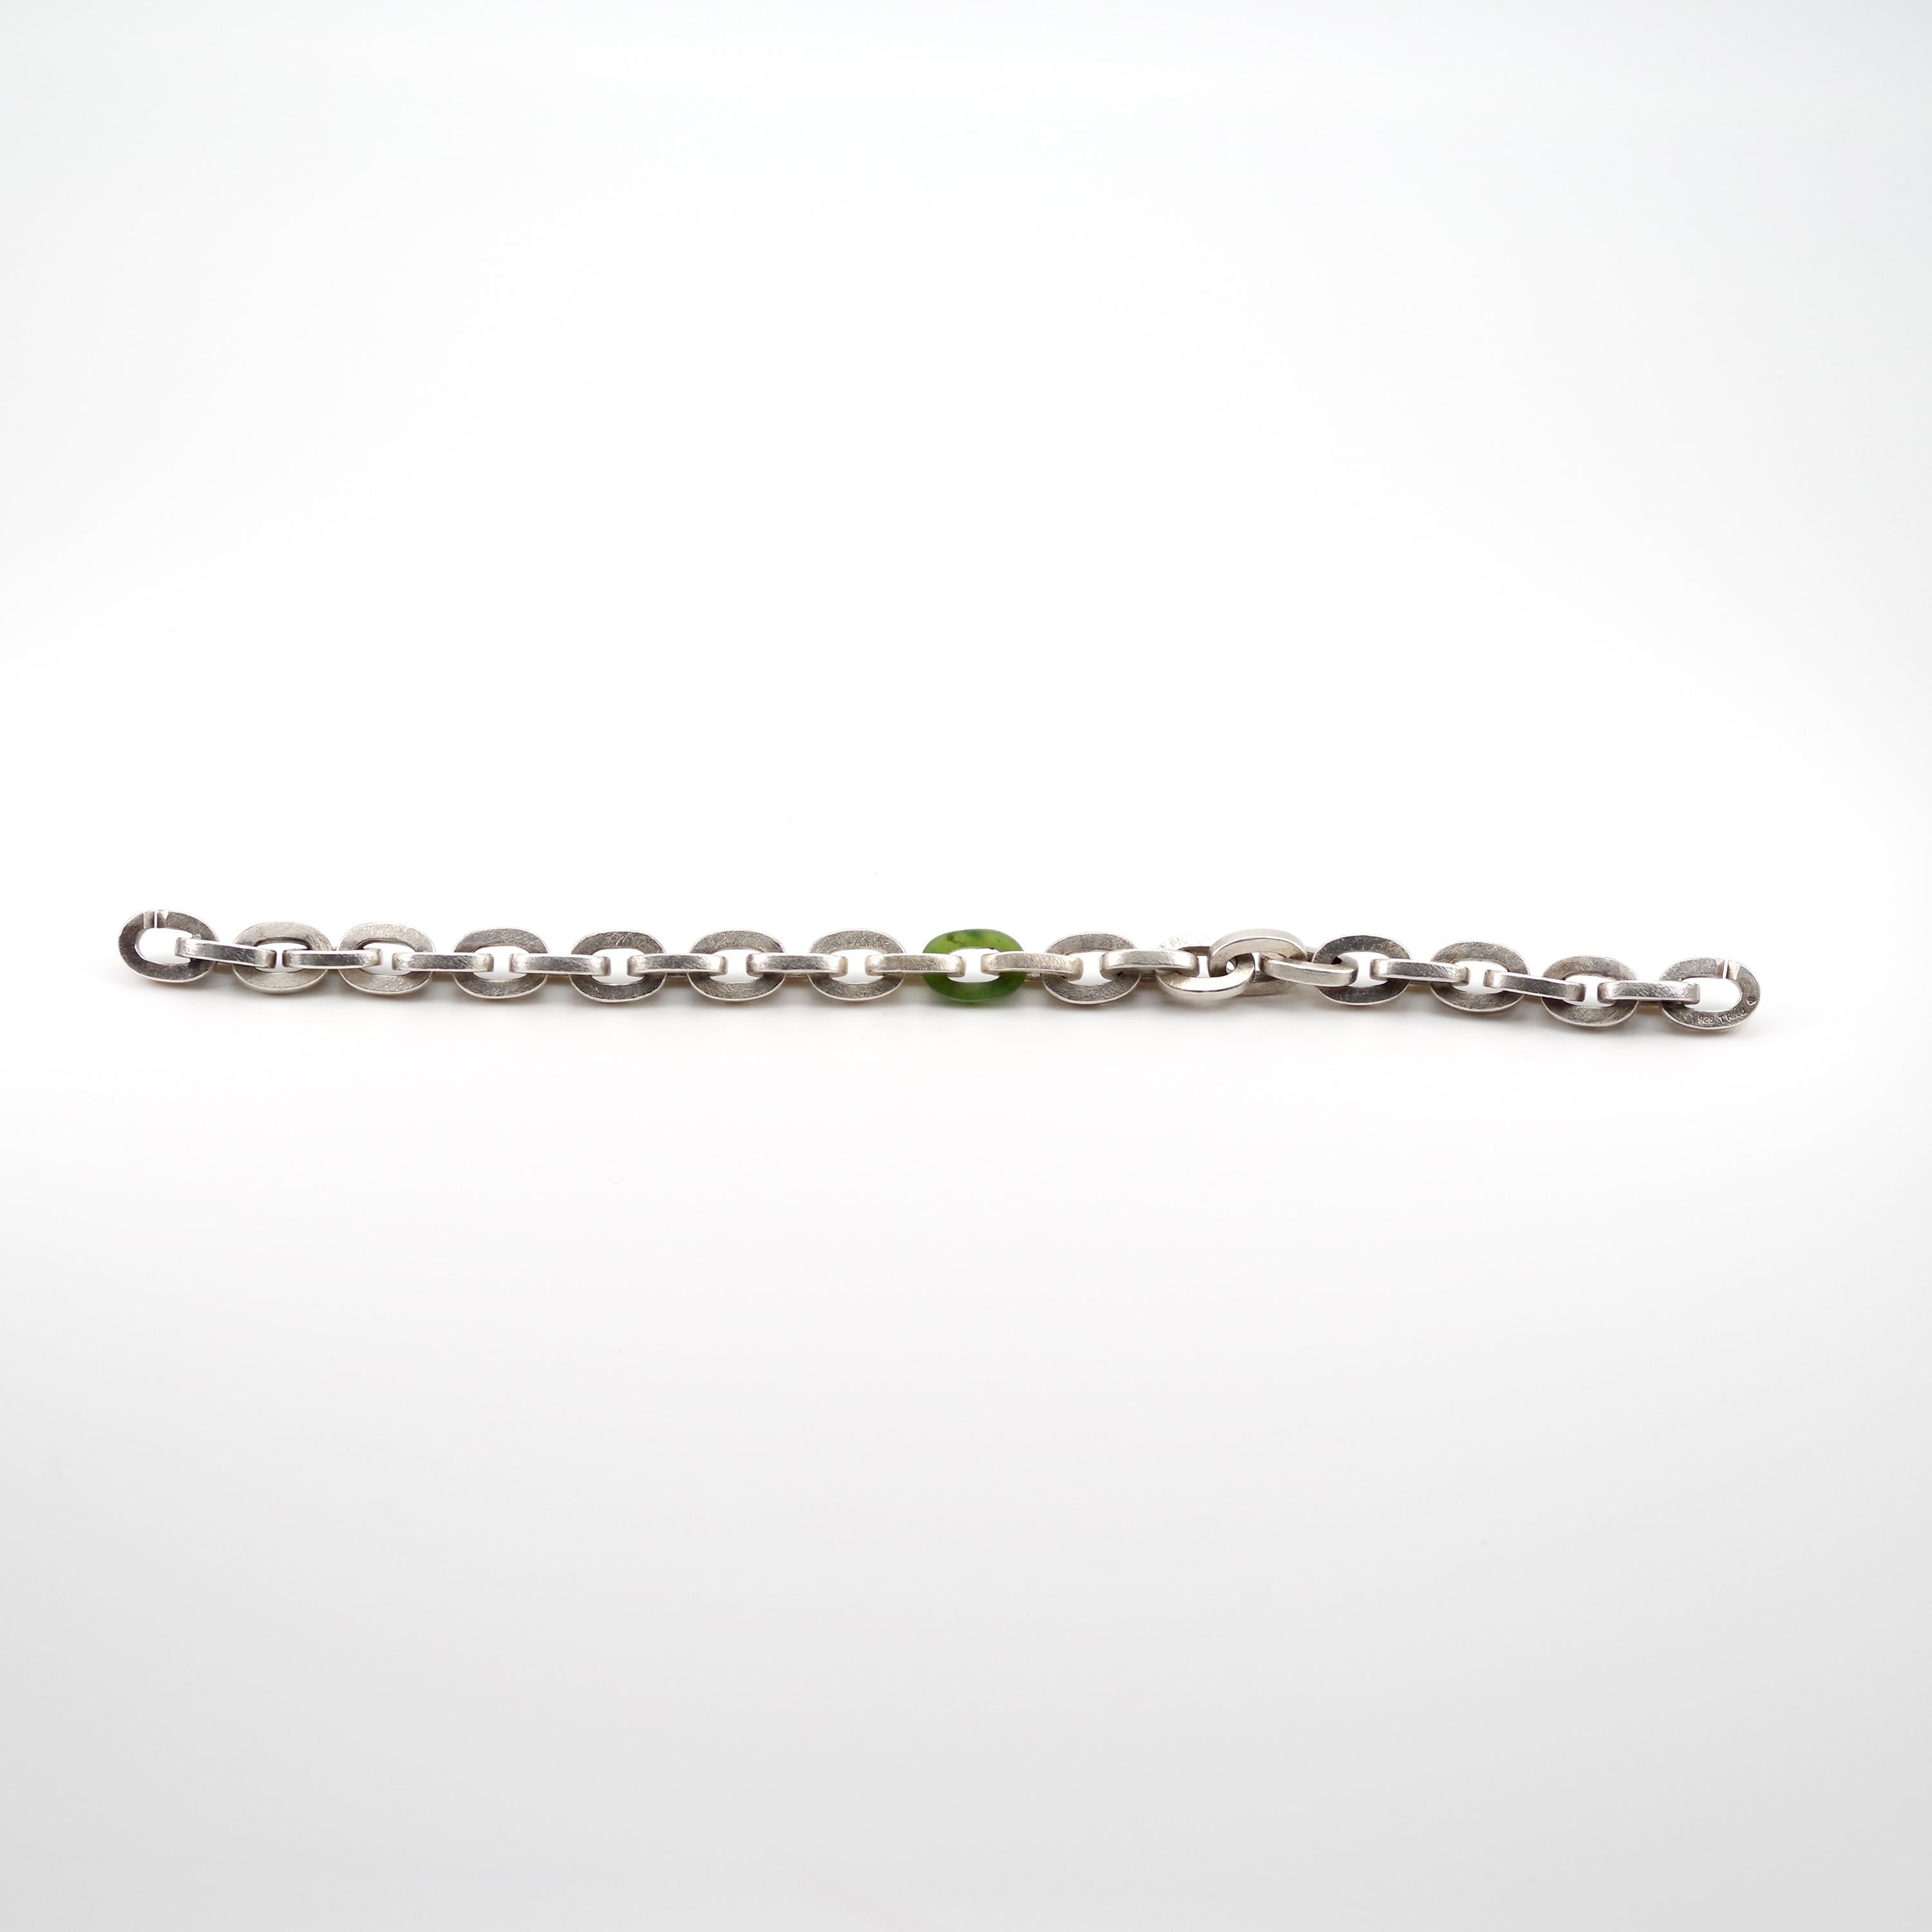 This substantial men's bracelet from iconic American designer Todd Reed was handmade in his Boulder, Colorado studio. It consists of twenty-seven 9 mm x 4 mm square-edged oval links made of sterling silver and one green nephrite jade link in the